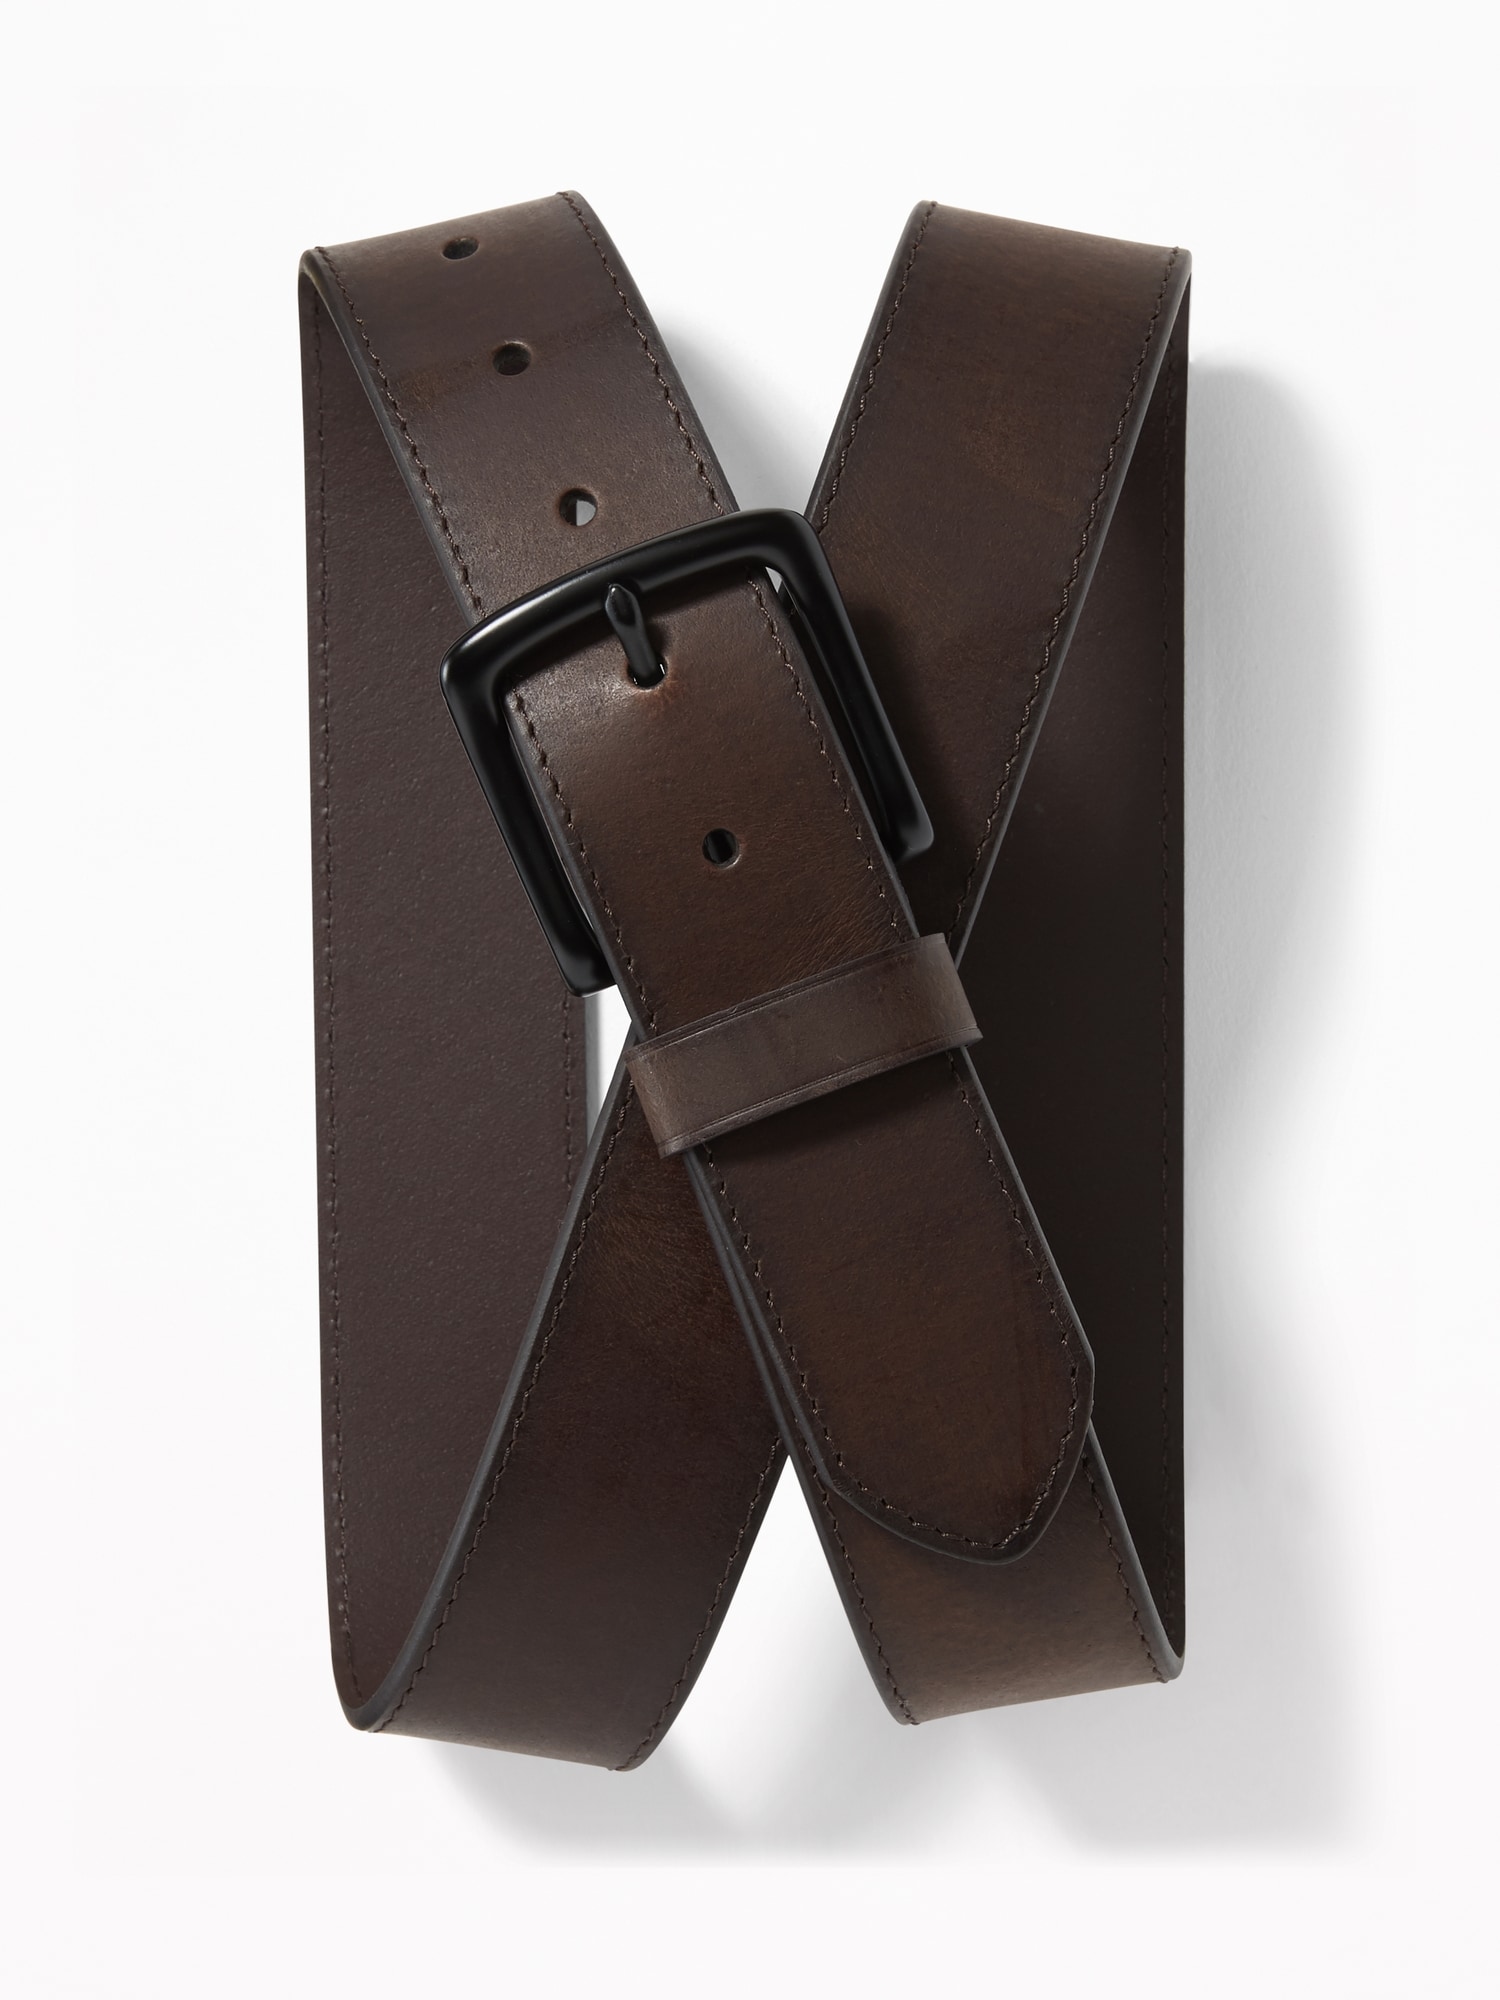 Imperfect Brown & Silver Mens Leather Belt – Obscure Belts